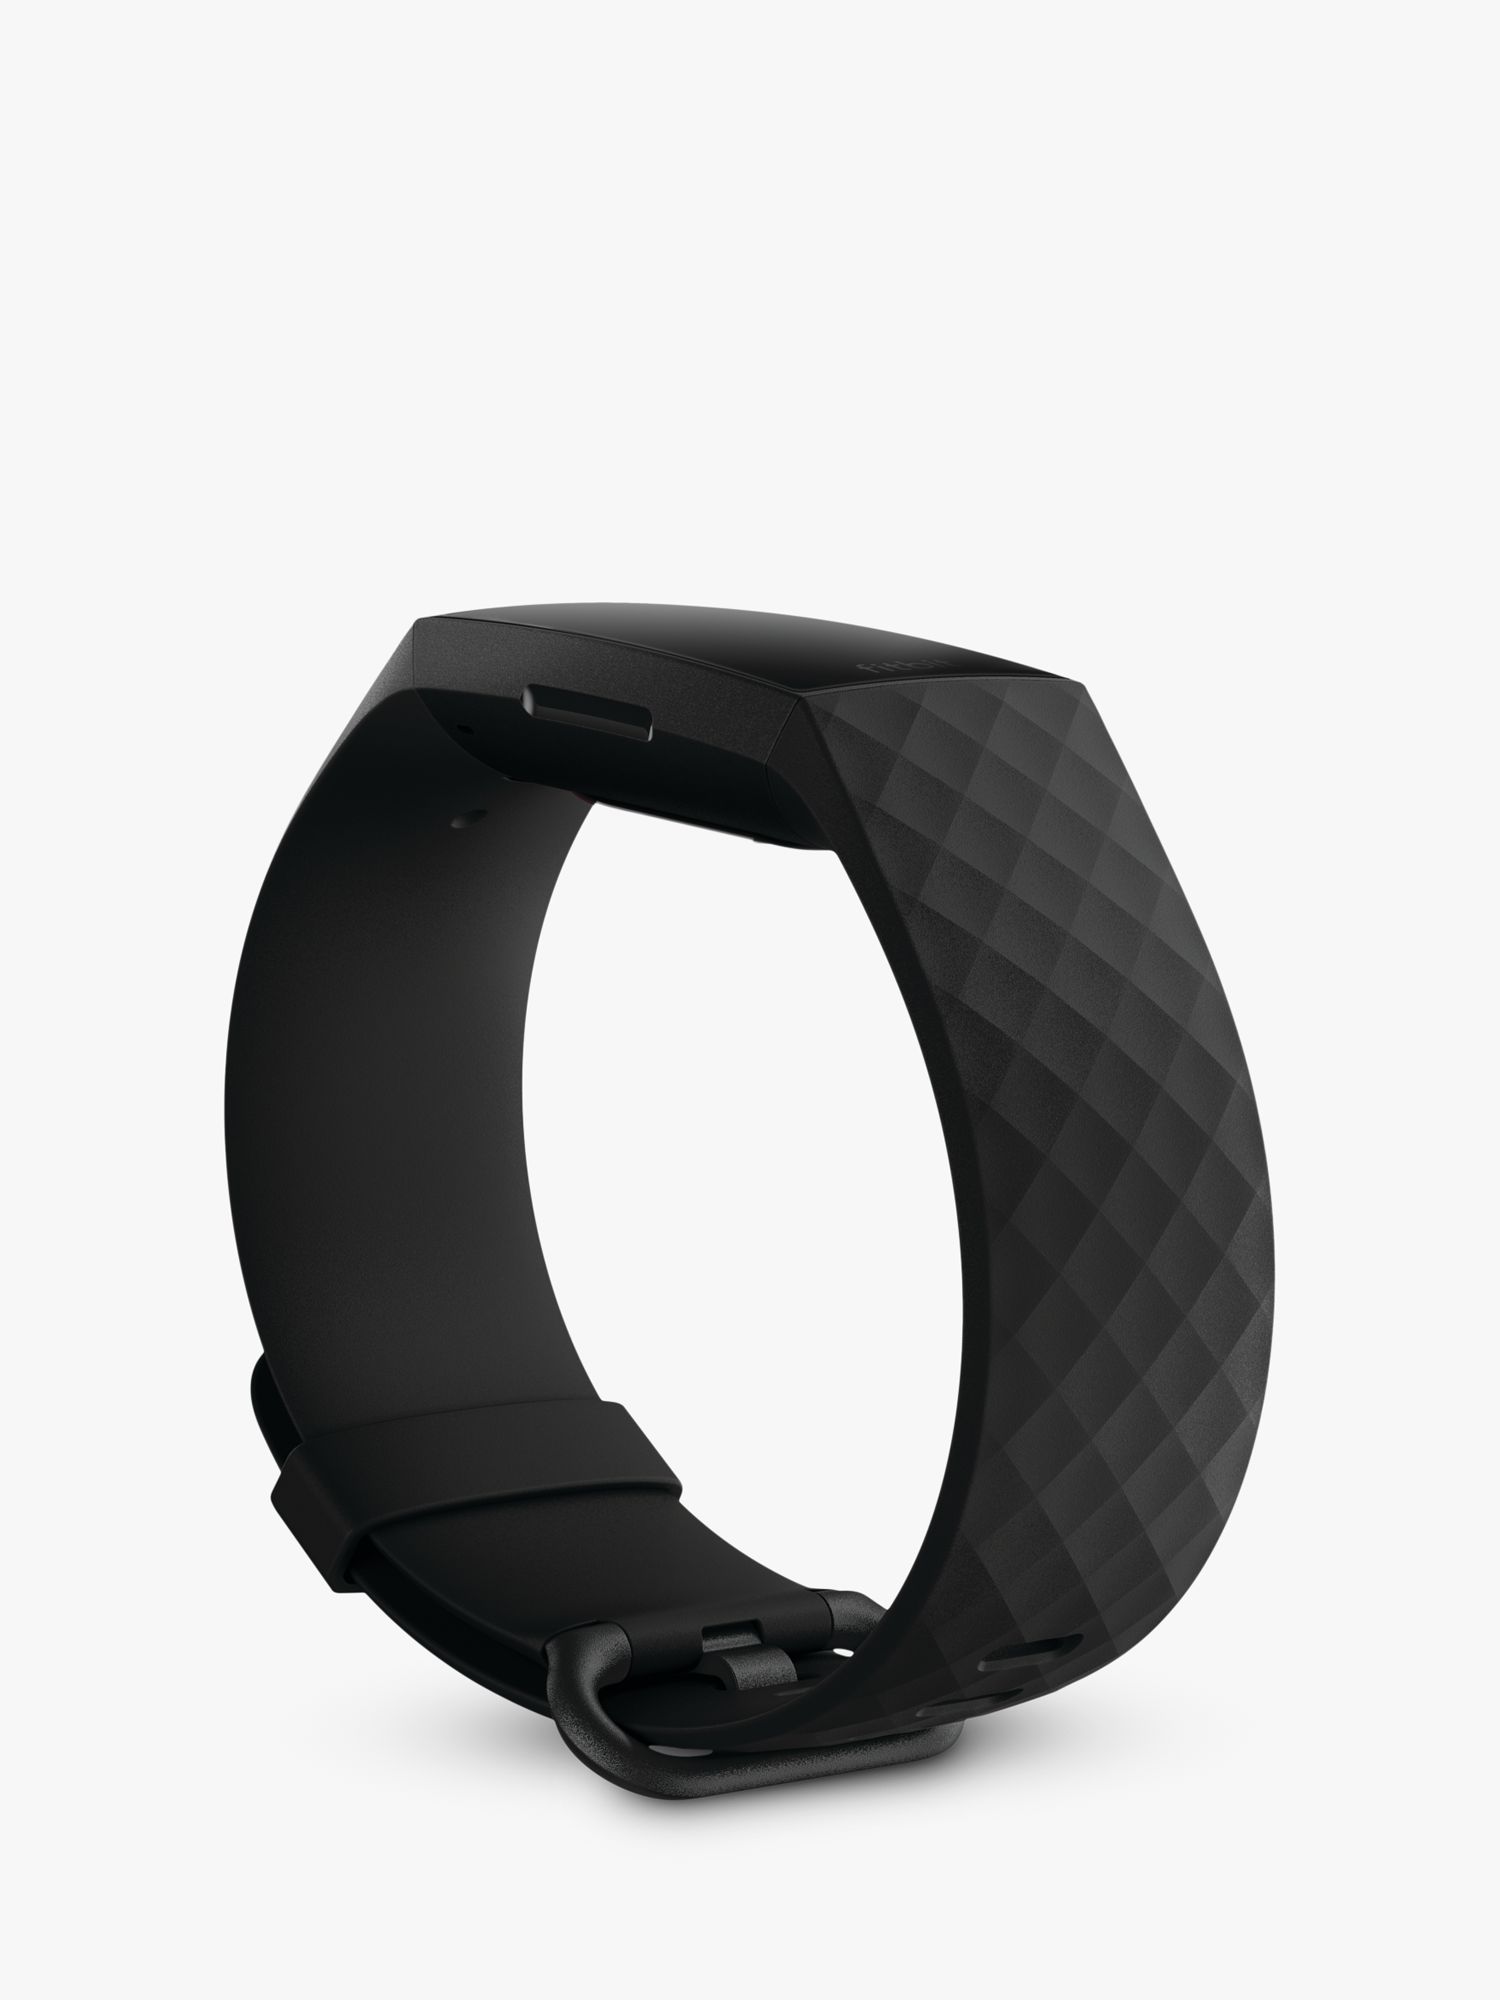 fitbit charge 4 discount